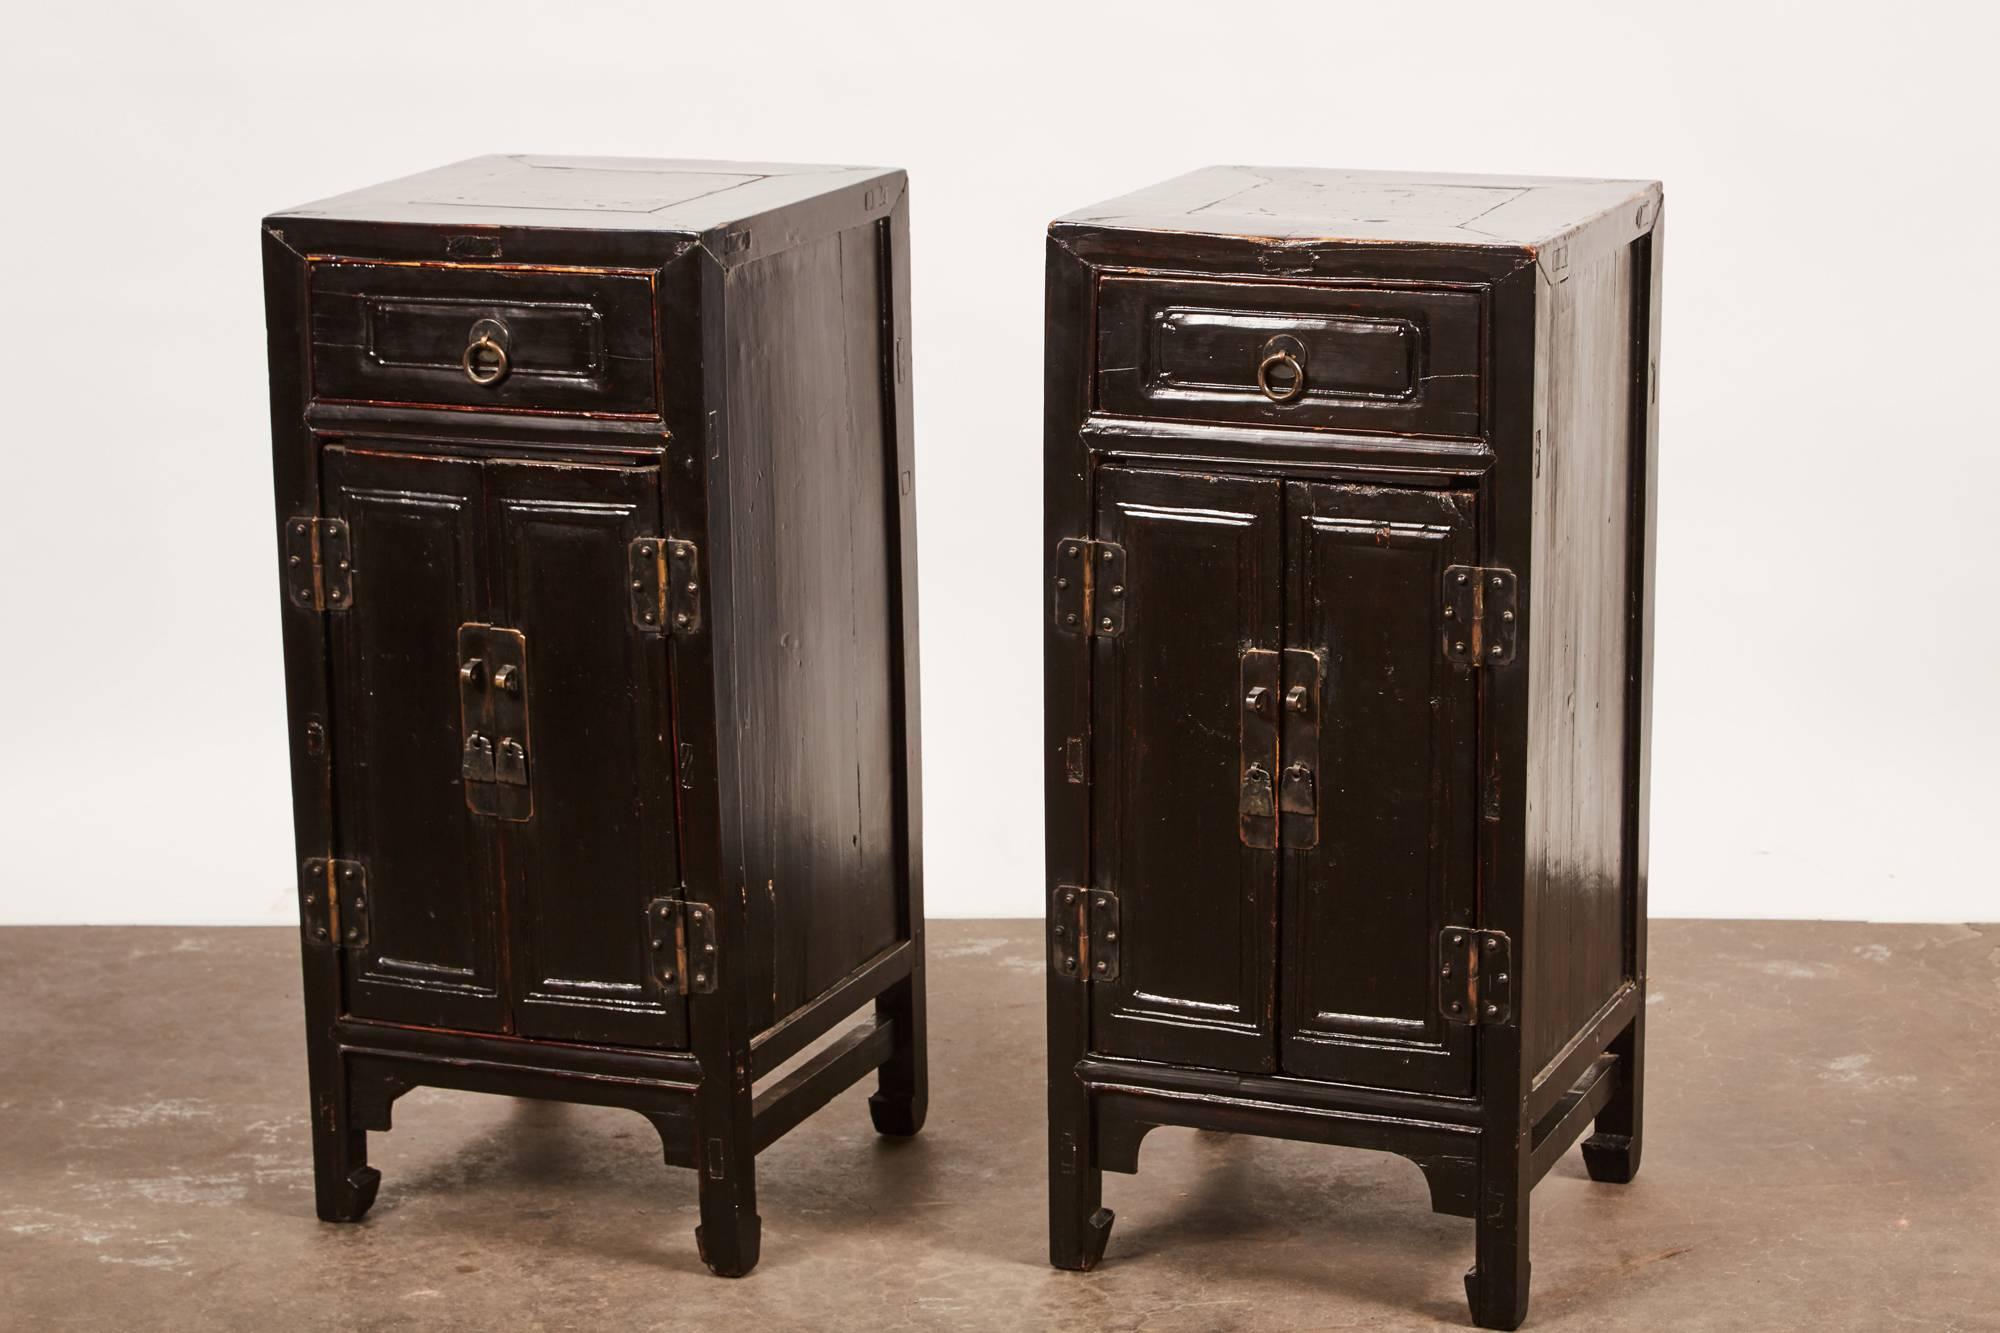 Pair of black lacquer side cabinets with a single drawer and two doors.